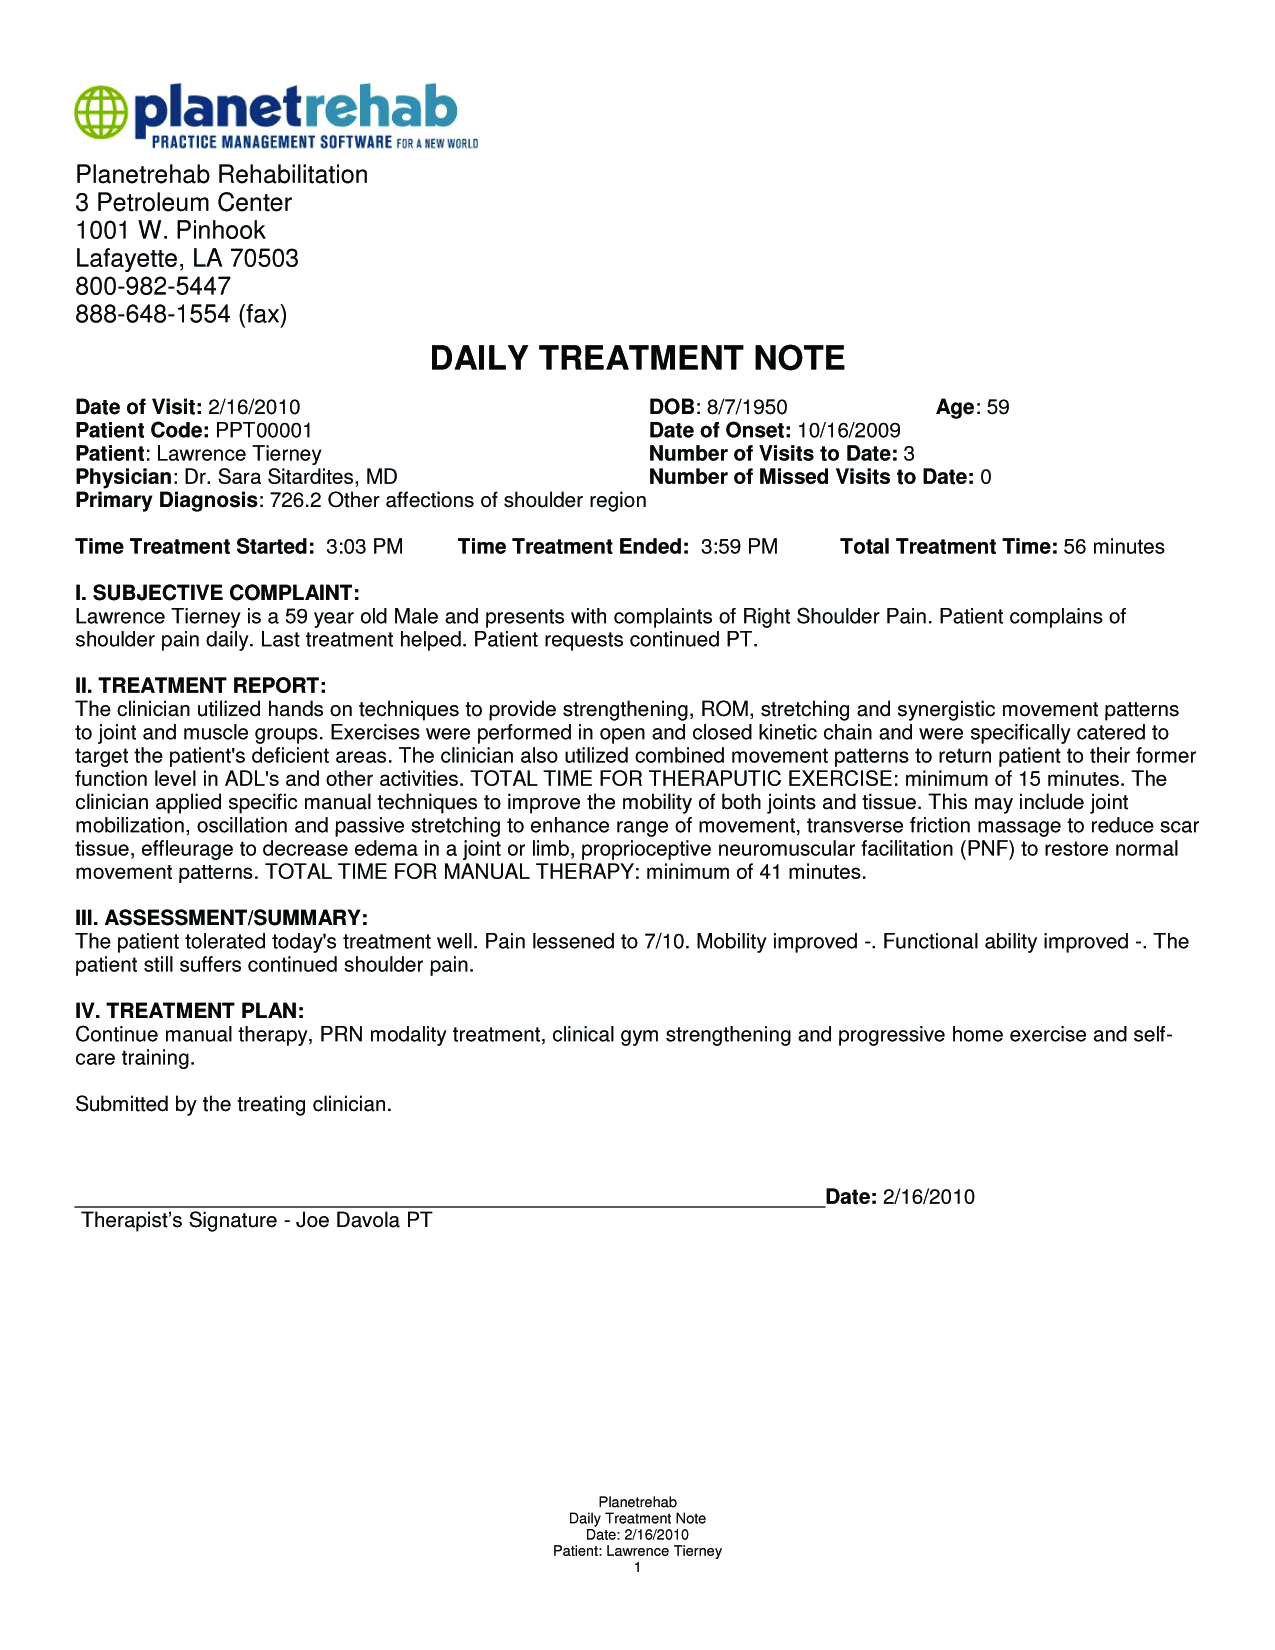 Daily treatment note